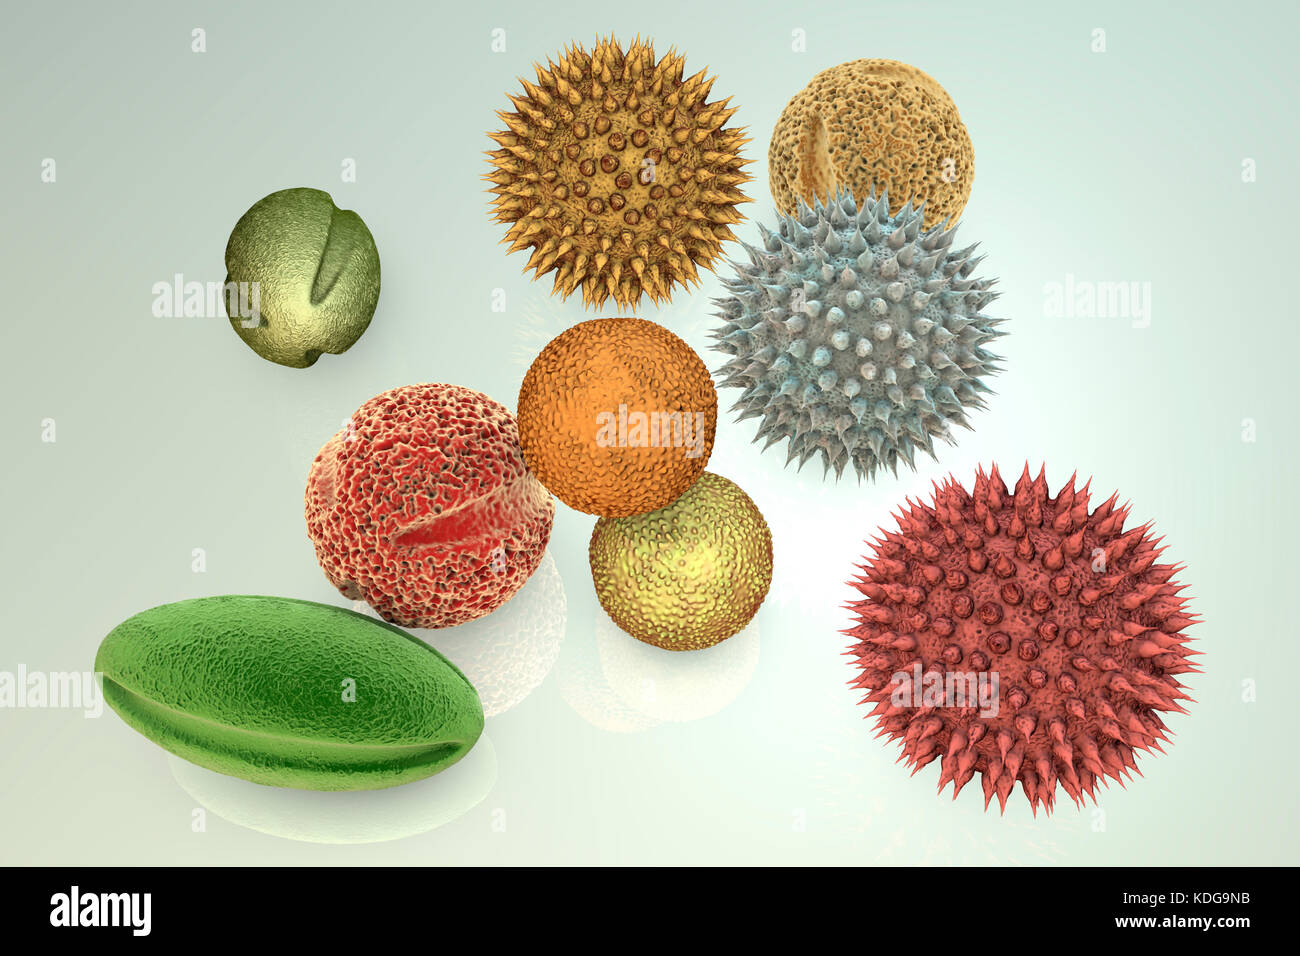 Pollen grains from different plants, computer illustration. Pollen grain size, shape and surface texture differ from one plant species to another, as seen here. The outer wall (exine) of the pollen in many plant species is highly sculpted which may assist in wind, water or insect dispersal. This pollen sculpting is also used by botanists to recognise plant species. Pores in the pollen wall help in water regulation and germination. These reproductive male spores produced by seed plants contain the male gametes. Pollen fertilises the female egg, with subsequent formation of plant seeds. Stock Photo